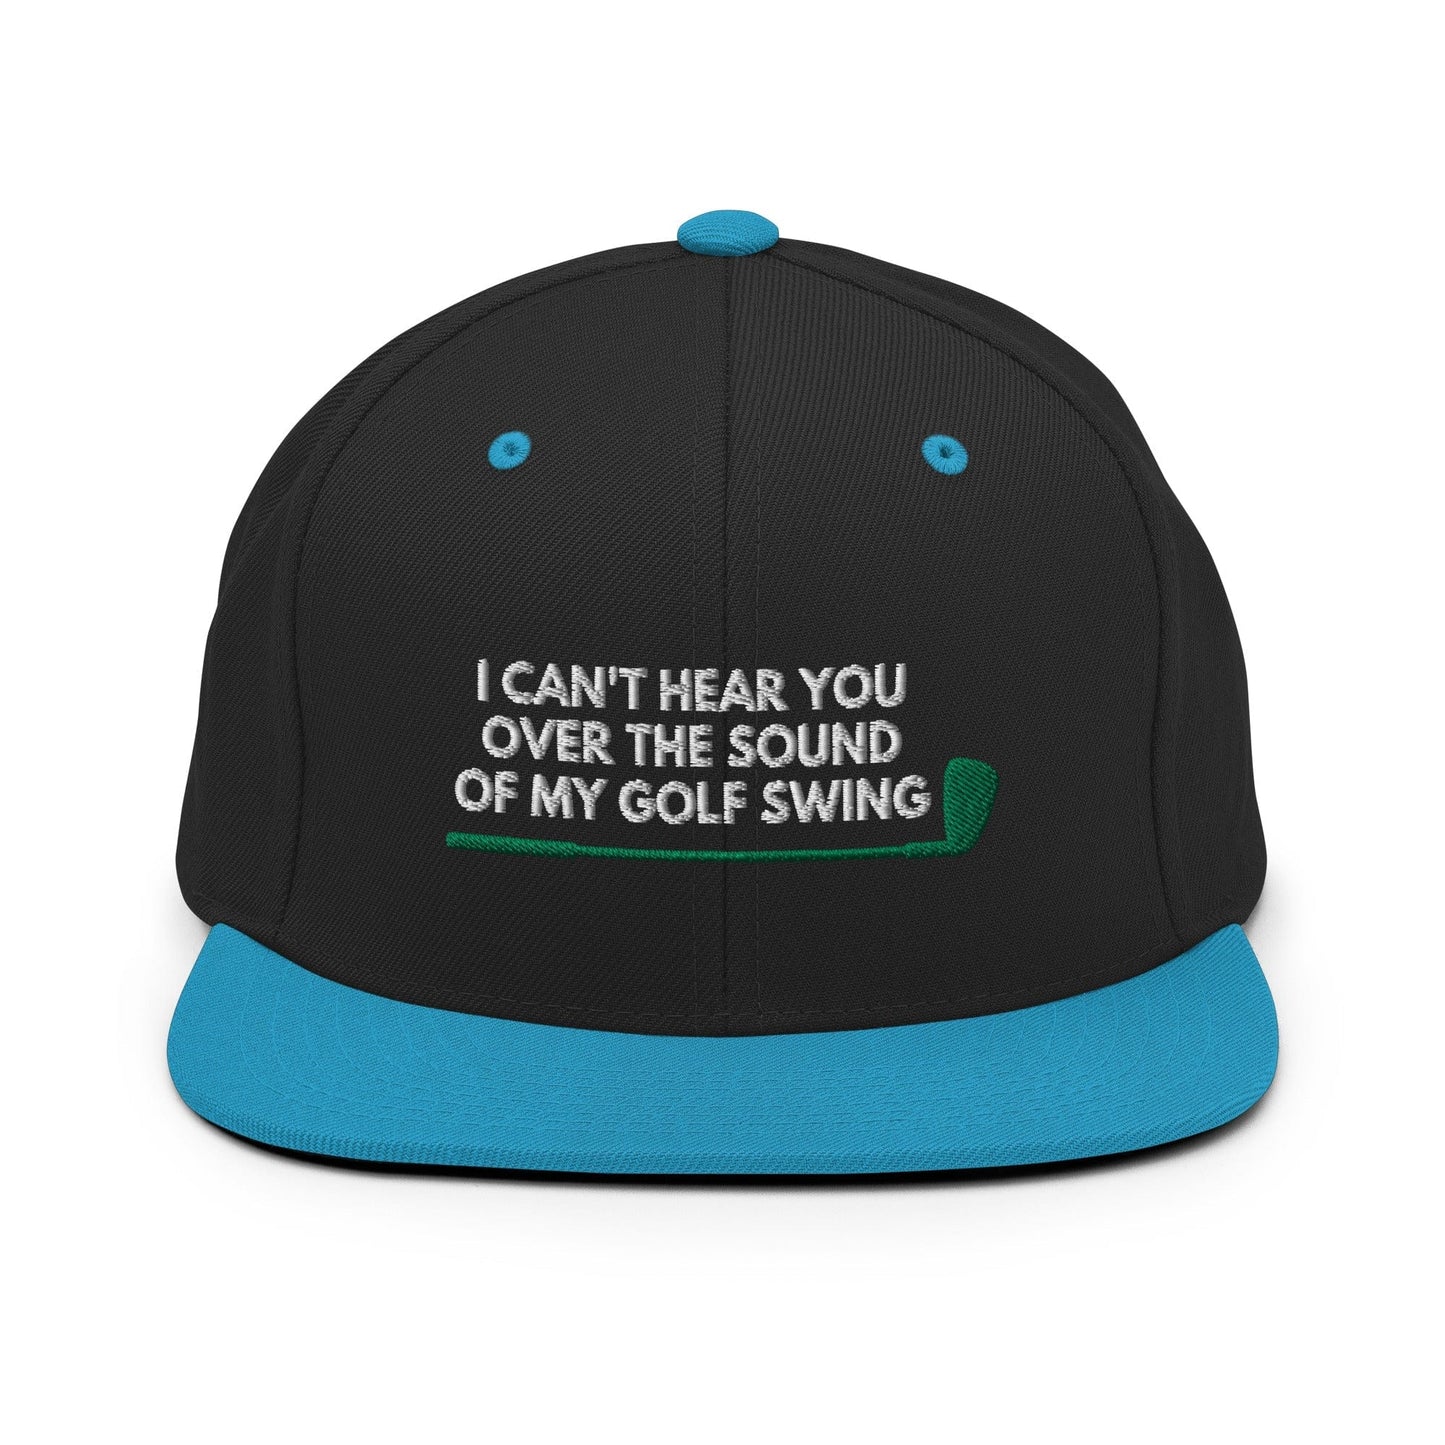 Funny Golfer Gifts  Snapback Hat Black/ Teal I Cant Hear You Over The Sound Of My Golf Swing Hat Snapback Hat